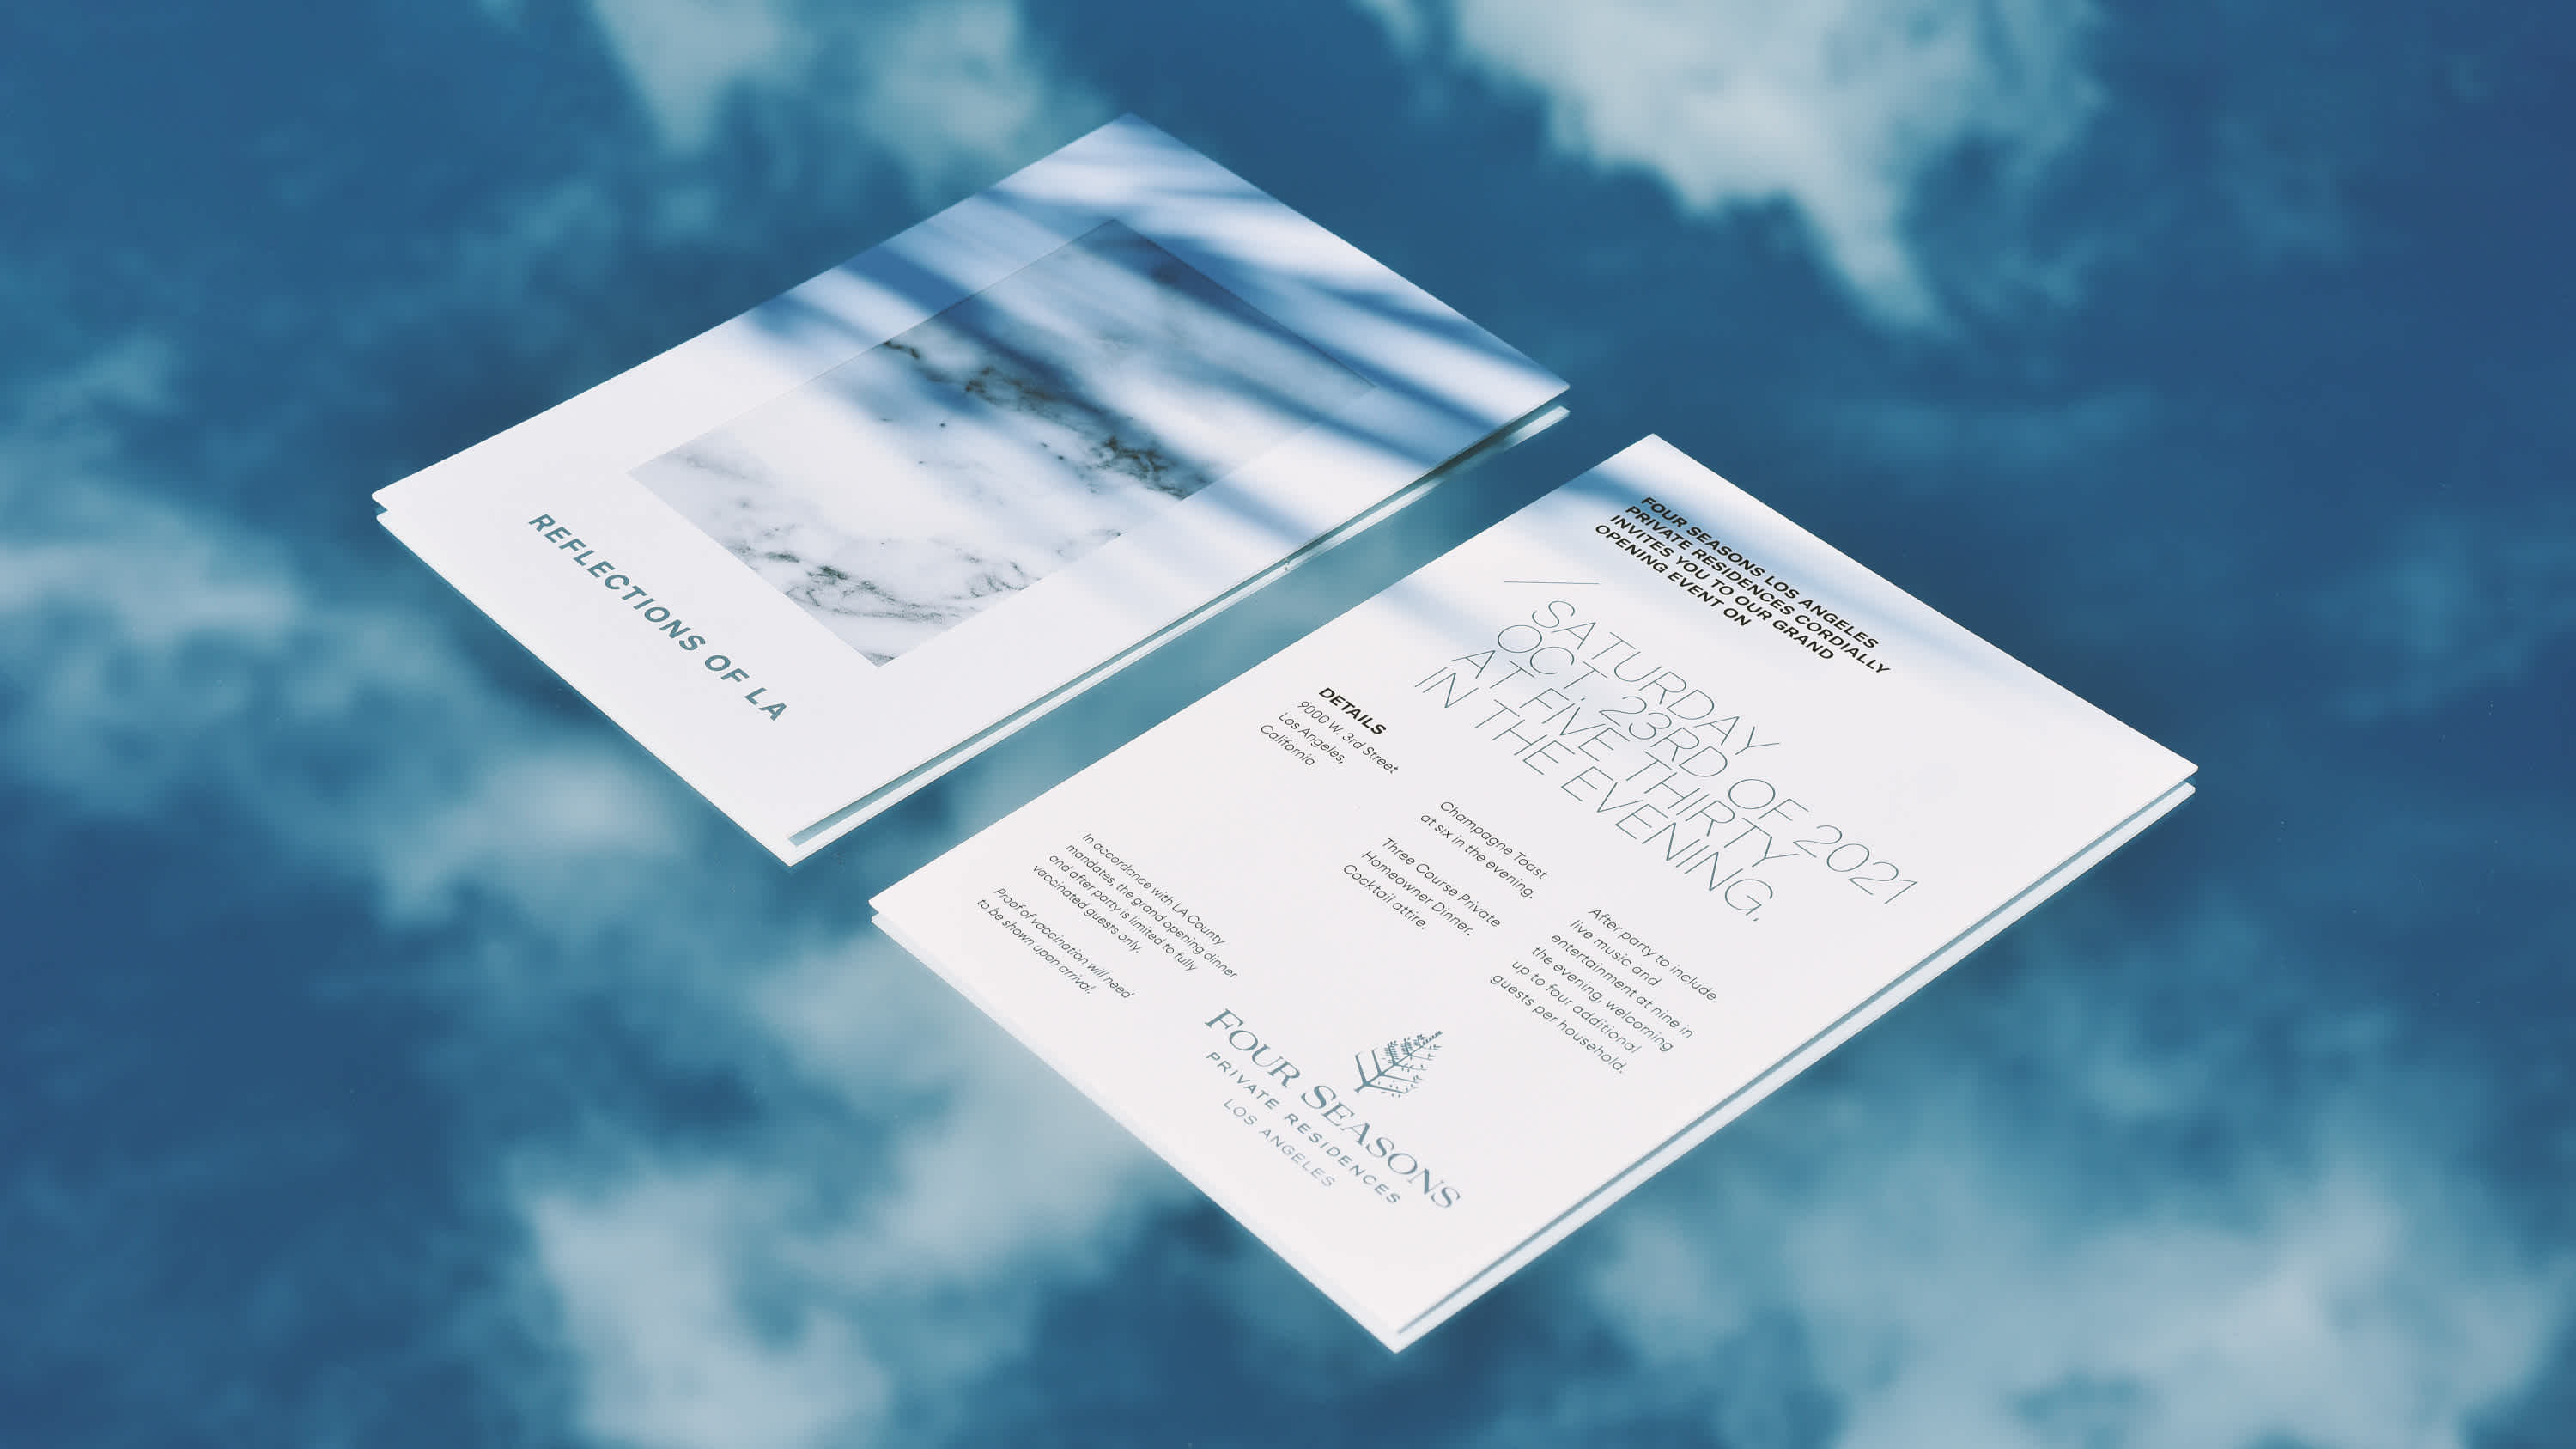 Ascend to the skies with Four Seasons Los Angeles' elegant invitation, floating above a dreamlike reflection of clouds. The marble detailing on the cover marries with the ethereal backdrop, offering a taste of the exclusive events that define the LA luxury lifestyle at its finest.